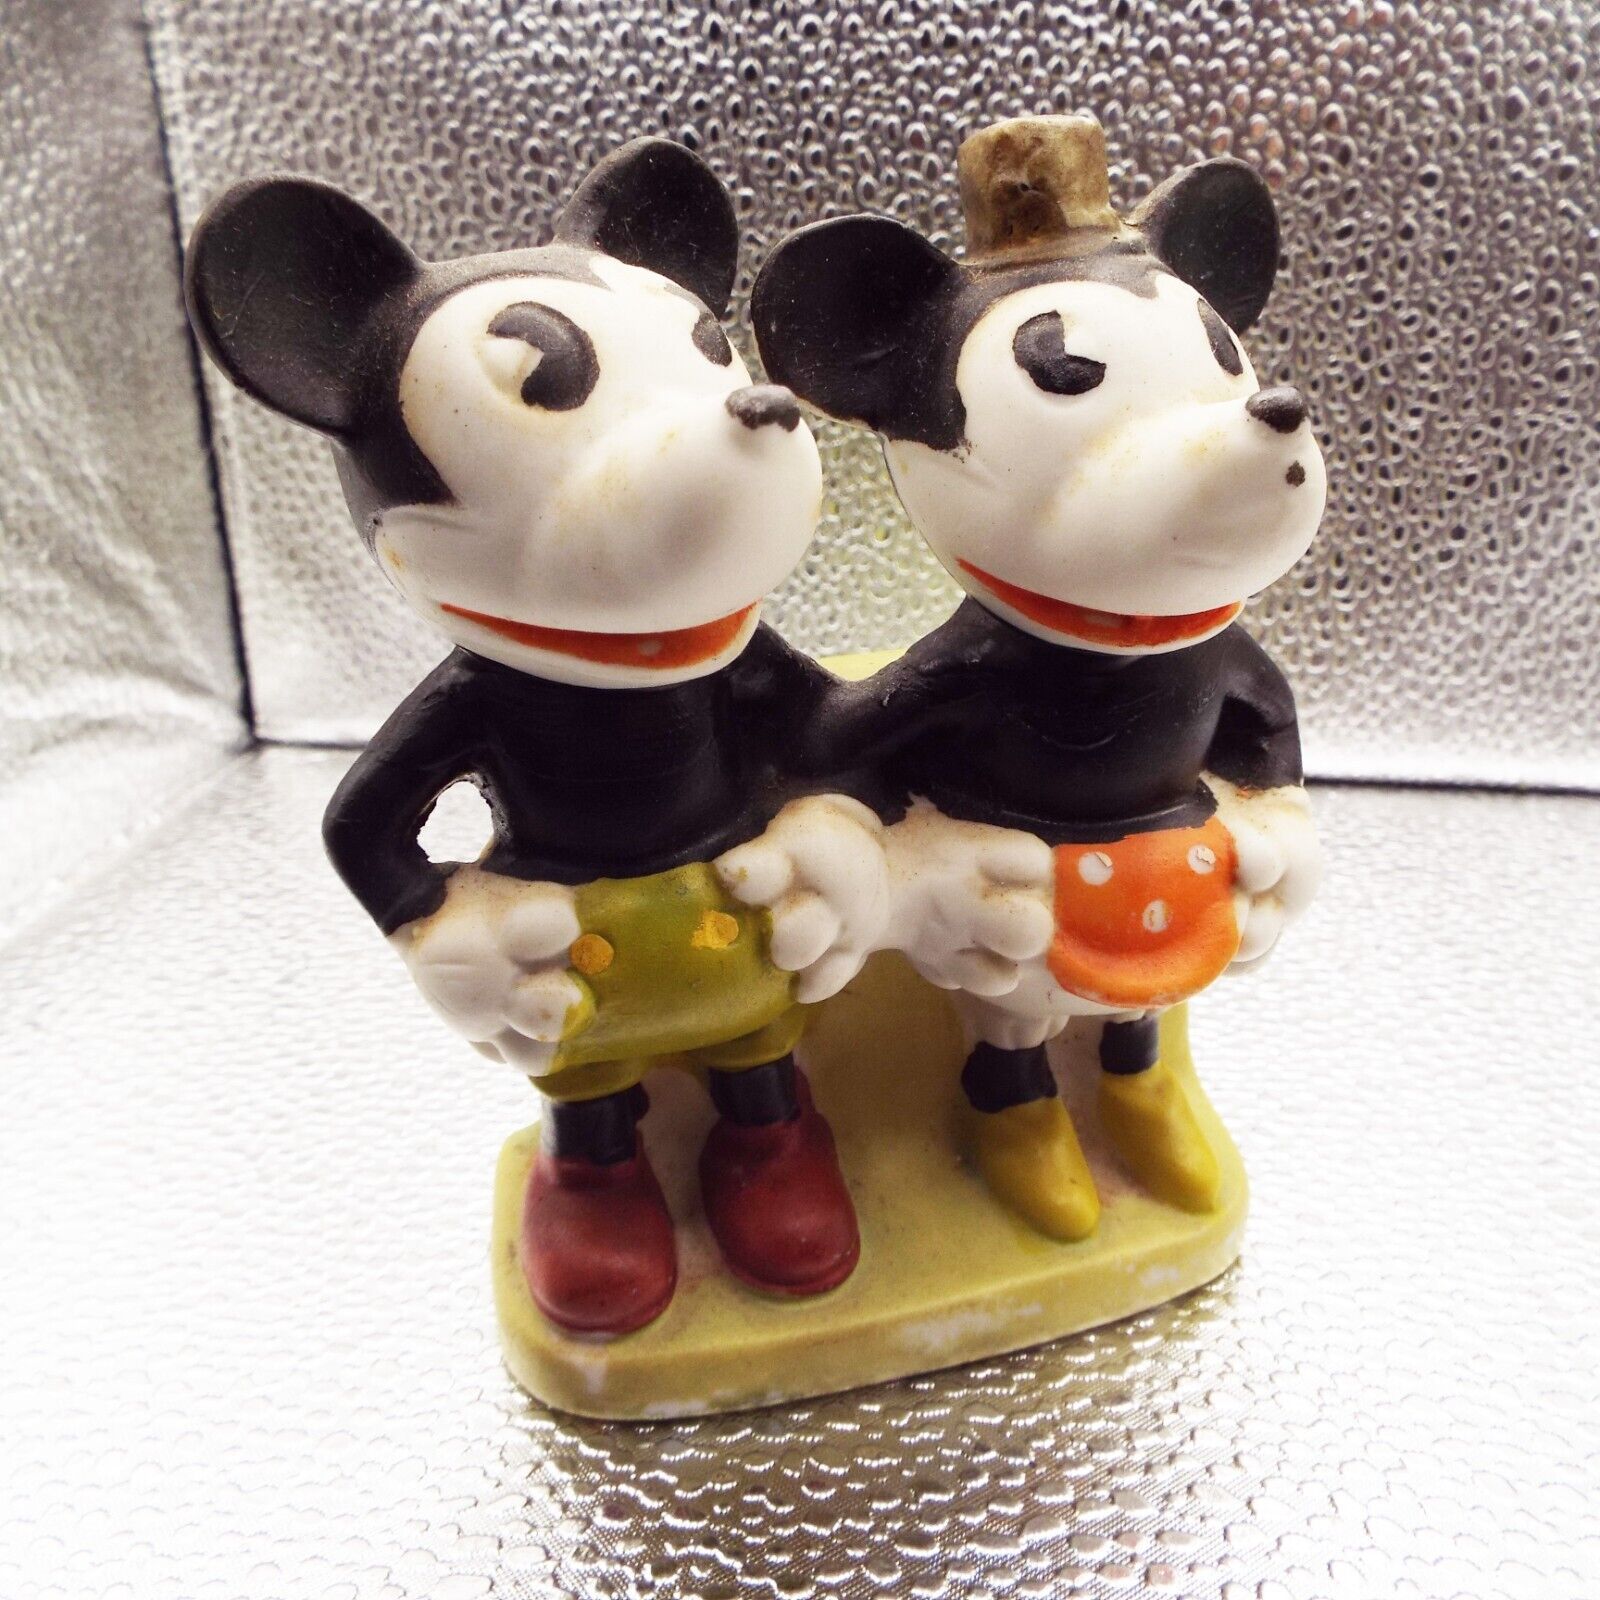 *RARE* WALT DISNEY 1930 MINNIE & MICKEY MOUSE TOOTHBRUSH HOLDER-BISQUE PORCELAIN